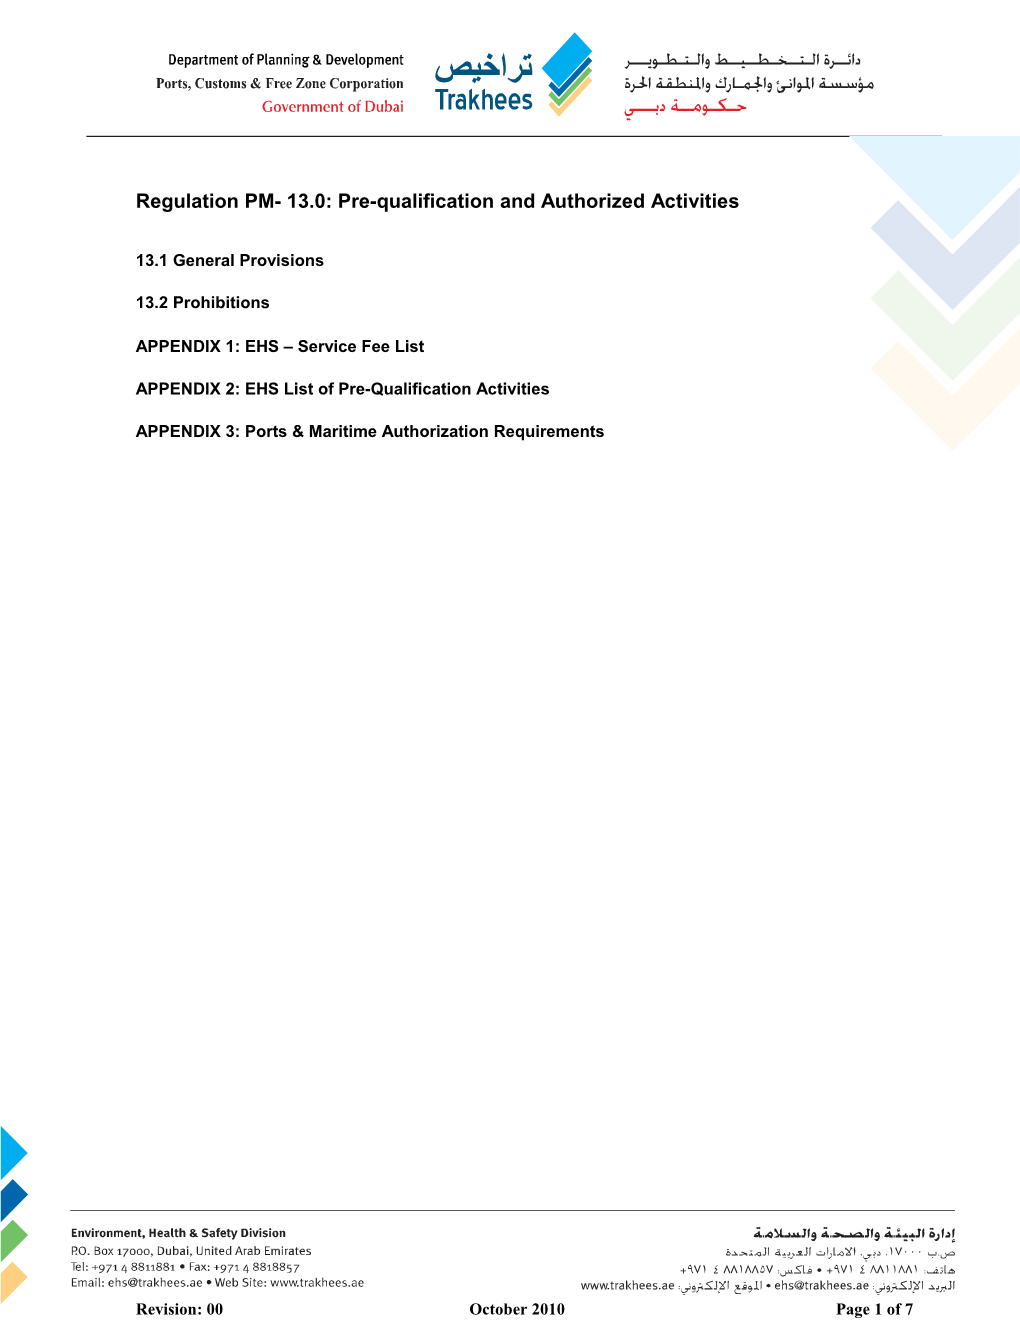 Regulation PM-13.0 Pre-Qualification and Authorized Activities